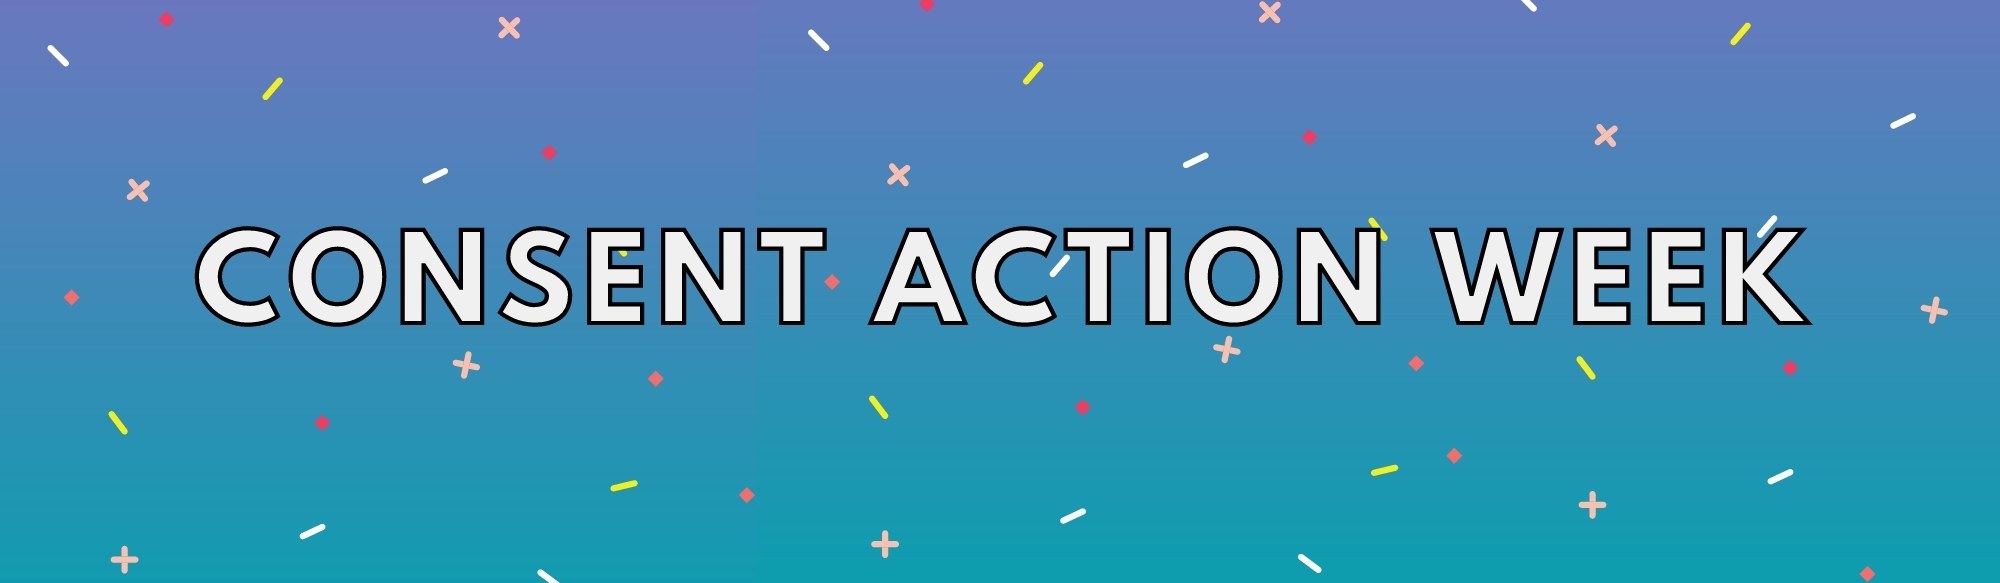 Graphic of a gradient background with scattered coloured confetti with the text "consent action week" on top.